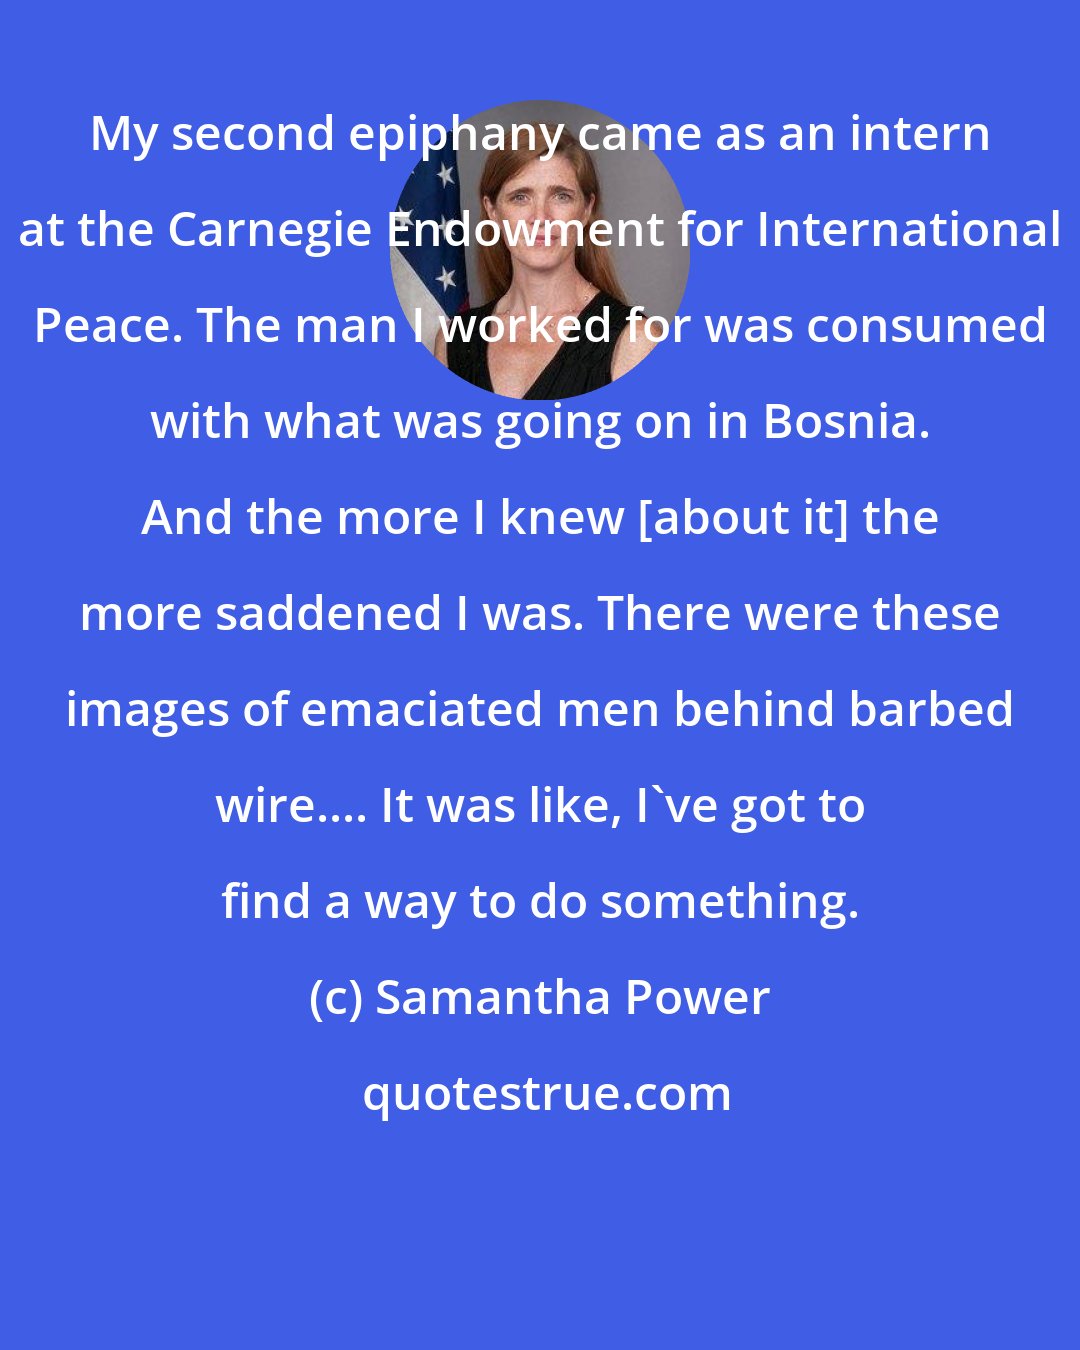 Samantha Power: My second epiphany came as an intern at the Carnegie Endowment for International Peace. The man I worked for was consumed with what was going on in Bosnia. And the more I knew [about it] the more saddened I was. There were these images of emaciated men behind barbed wire.... It was like, I've got to find a way to do something.